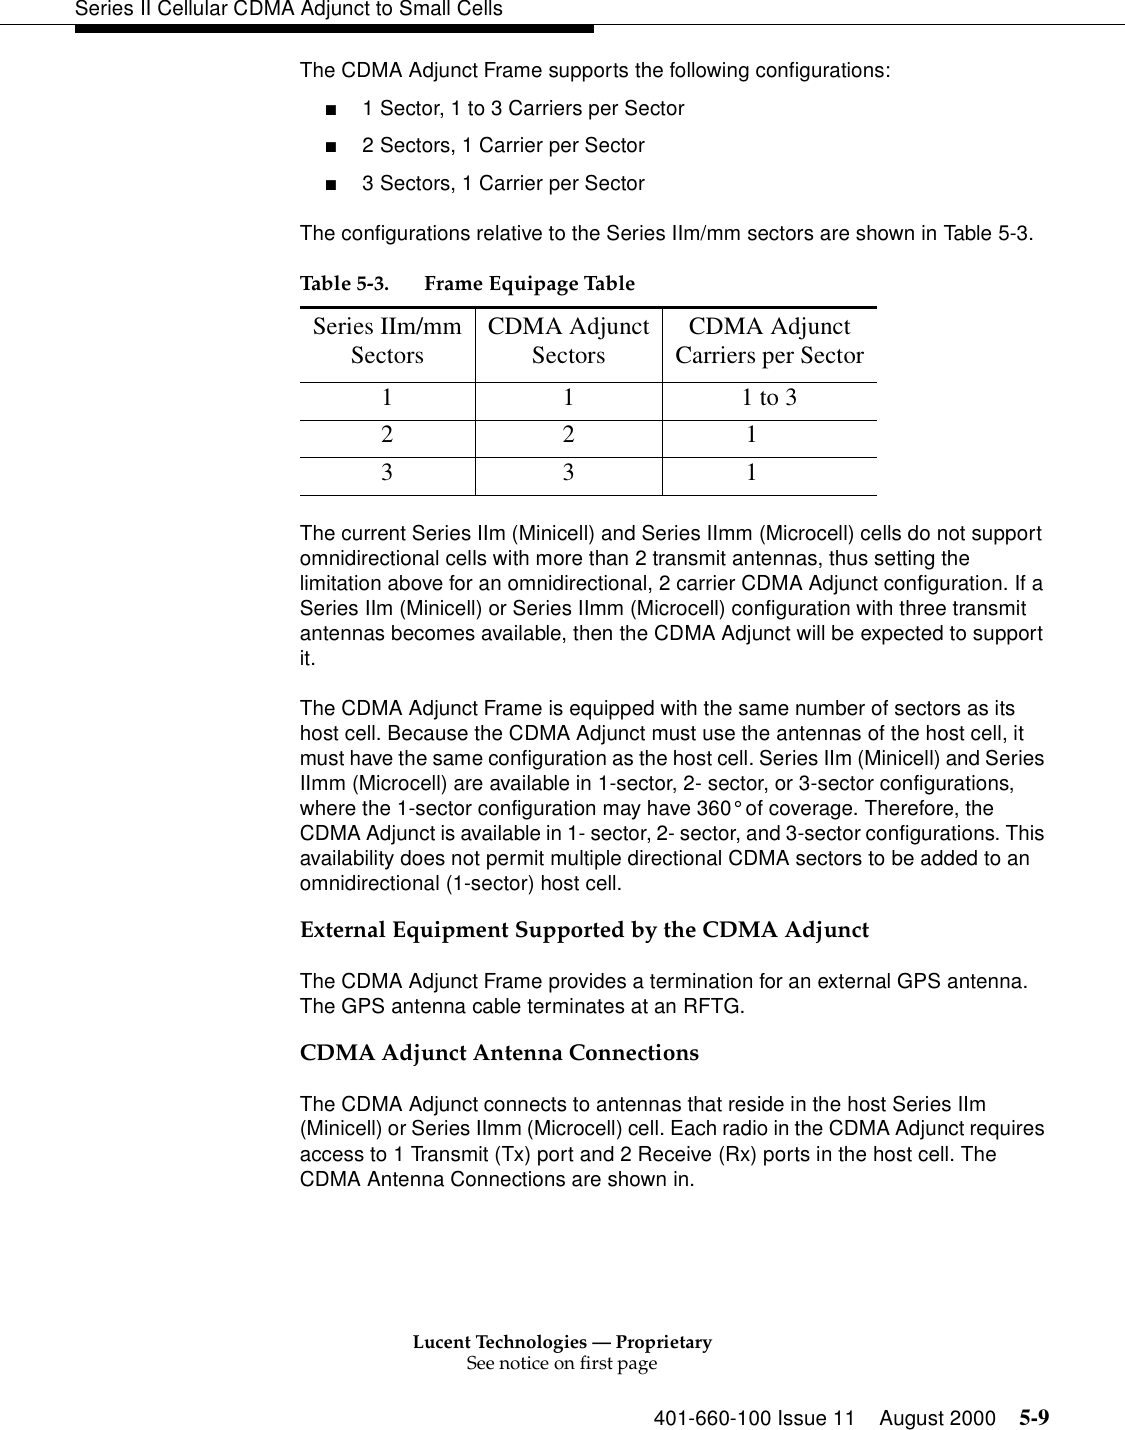 Lucent Technologies — ProprietarySee notice on first page401-660-100 Issue 11 August 2000 5-9Series II Cellular CDMA Adjunct to Small CellsThe CDMA Adjunct Frame supports the following configurations:■1 Sector, 1 to 3 Carriers per Sector■2 Sectors, 1 Carrier per Sector ■3 Sectors, 1 Carrier per SectorThe configurations relative to the Series IIm/mm sectors are shown in Table 5-3.The current Series IIm (Minicell) and Series IImm (Microcell) cells do not support omnidirectional cells with more than 2 transmit antennas, thus setting the limitation above for an omnidirectional, 2 carrier CDMA Adjunct configuration. If a Series IIm (Minicell) or Series IImm (Microcell) configuration with three transmit antennas becomes available, then the CDMA Adjunct will be expected to support it.The CDMA Adjunct Frame is equipped with the same number of sectors as its host cell. Because the CDMA Adjunct must use the antennas of the host cell, it must have the same configuration as the host cell. Series IIm (Minicell) and Series IImm (Microcell) are available in 1-sector, 2- sector, or 3-sector configurations, where the 1-sector configuration may have 360° of coverage. Therefore, the CDMA Adjunct is available in 1- sector, 2- sector, and 3-sector configurations. This availability does not permit multiple directional CDMA sectors to be added to an omnidirectional (1-sector) host cell.External Equipment Supported by the CDMA AdjunctThe CDMA Adjunct Frame provides a termination for an external GPS antenna. The GPS antenna cable terminates at an RFTG.CDMA Adjunct Antenna ConnectionsThe CDMA Adjunct connects to antennas that reside in the host Series IIm (Minicell) or Series IImm (Microcell) cell. Each radio in the CDMA Adjunct requires access to 1 Transmit (Tx) port and 2 Receive (Rx) ports in the host cell. The CDMA Antenna Connections are shown in.Table 5-3. Frame Equipage TableSeries IIm/mmSectors CDMA AdjunctSectors CDMA AdjunctCarriers per Sector1 1 1 to 32 2             13 3             1